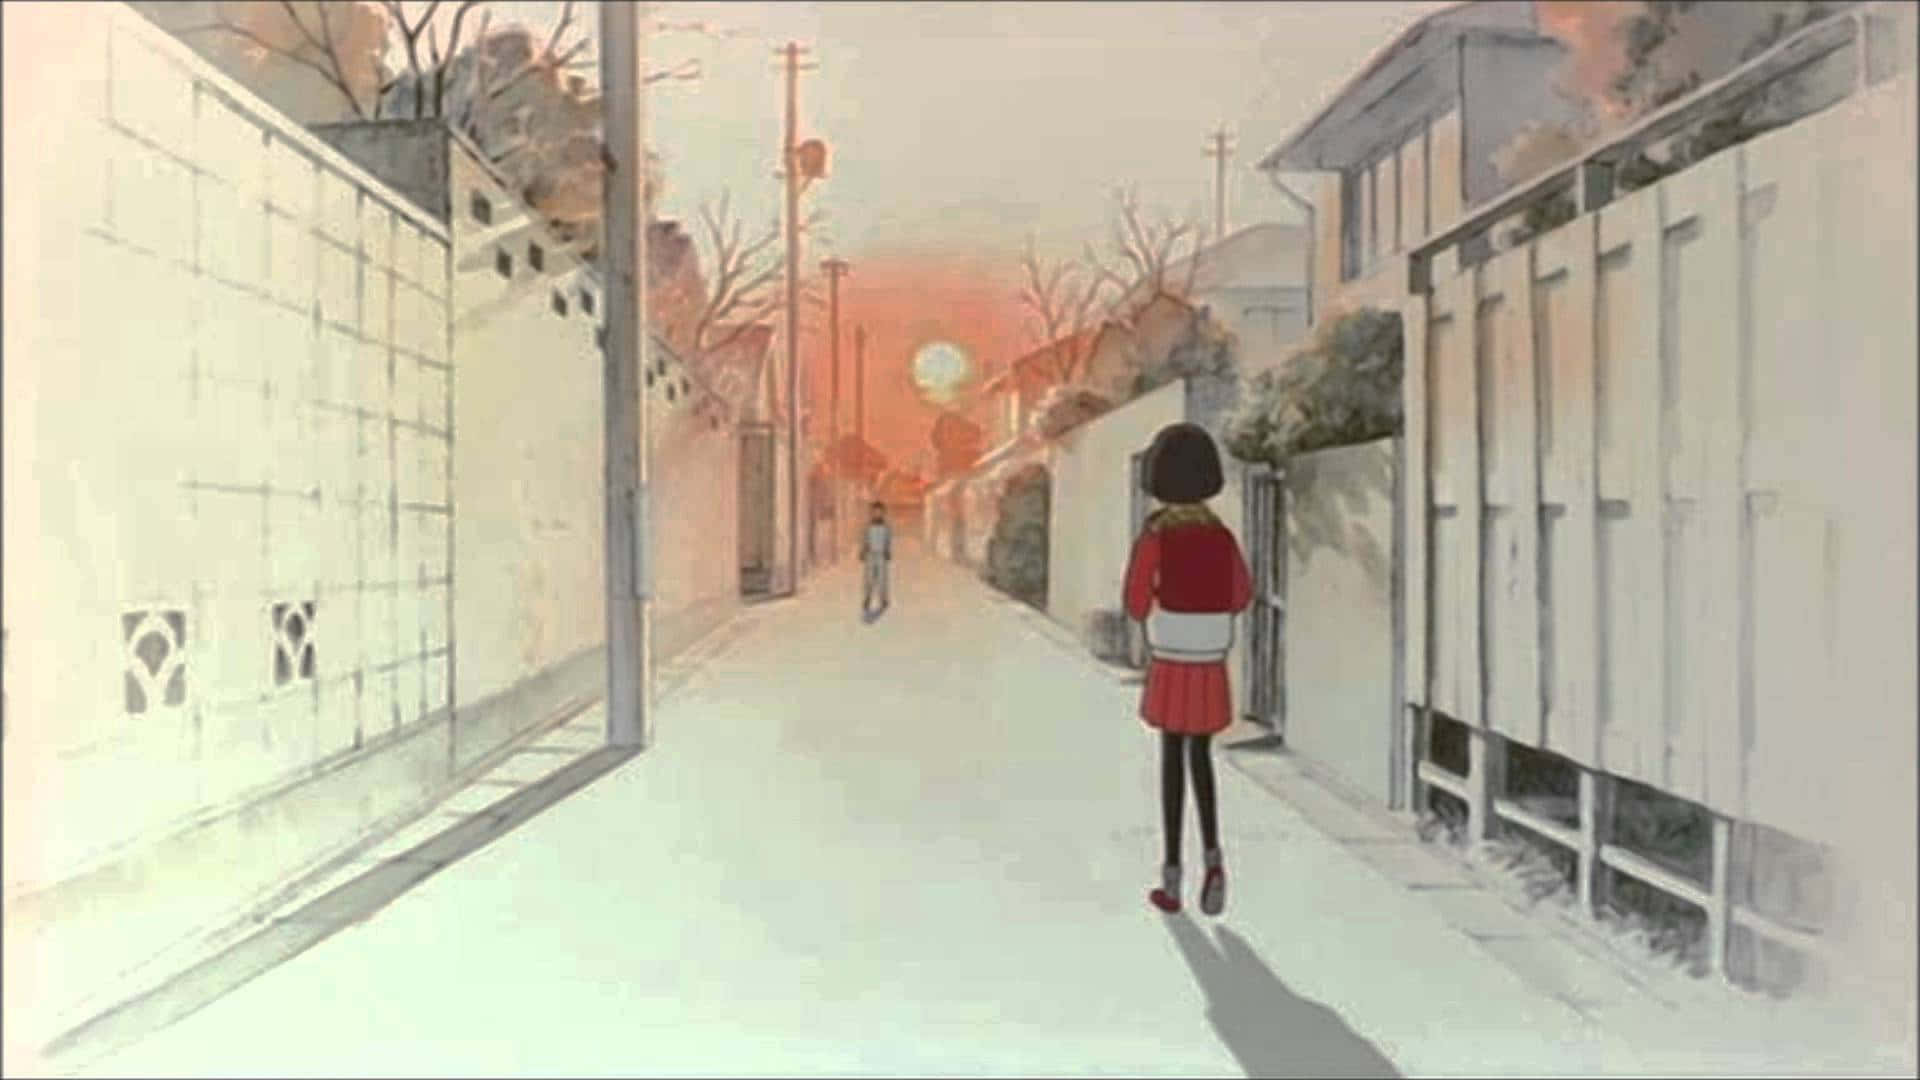 Taeko Okajima, the protagonist of Only Yesterday, gazing into the distance amidst a picturesque countryside scene. Wallpaper